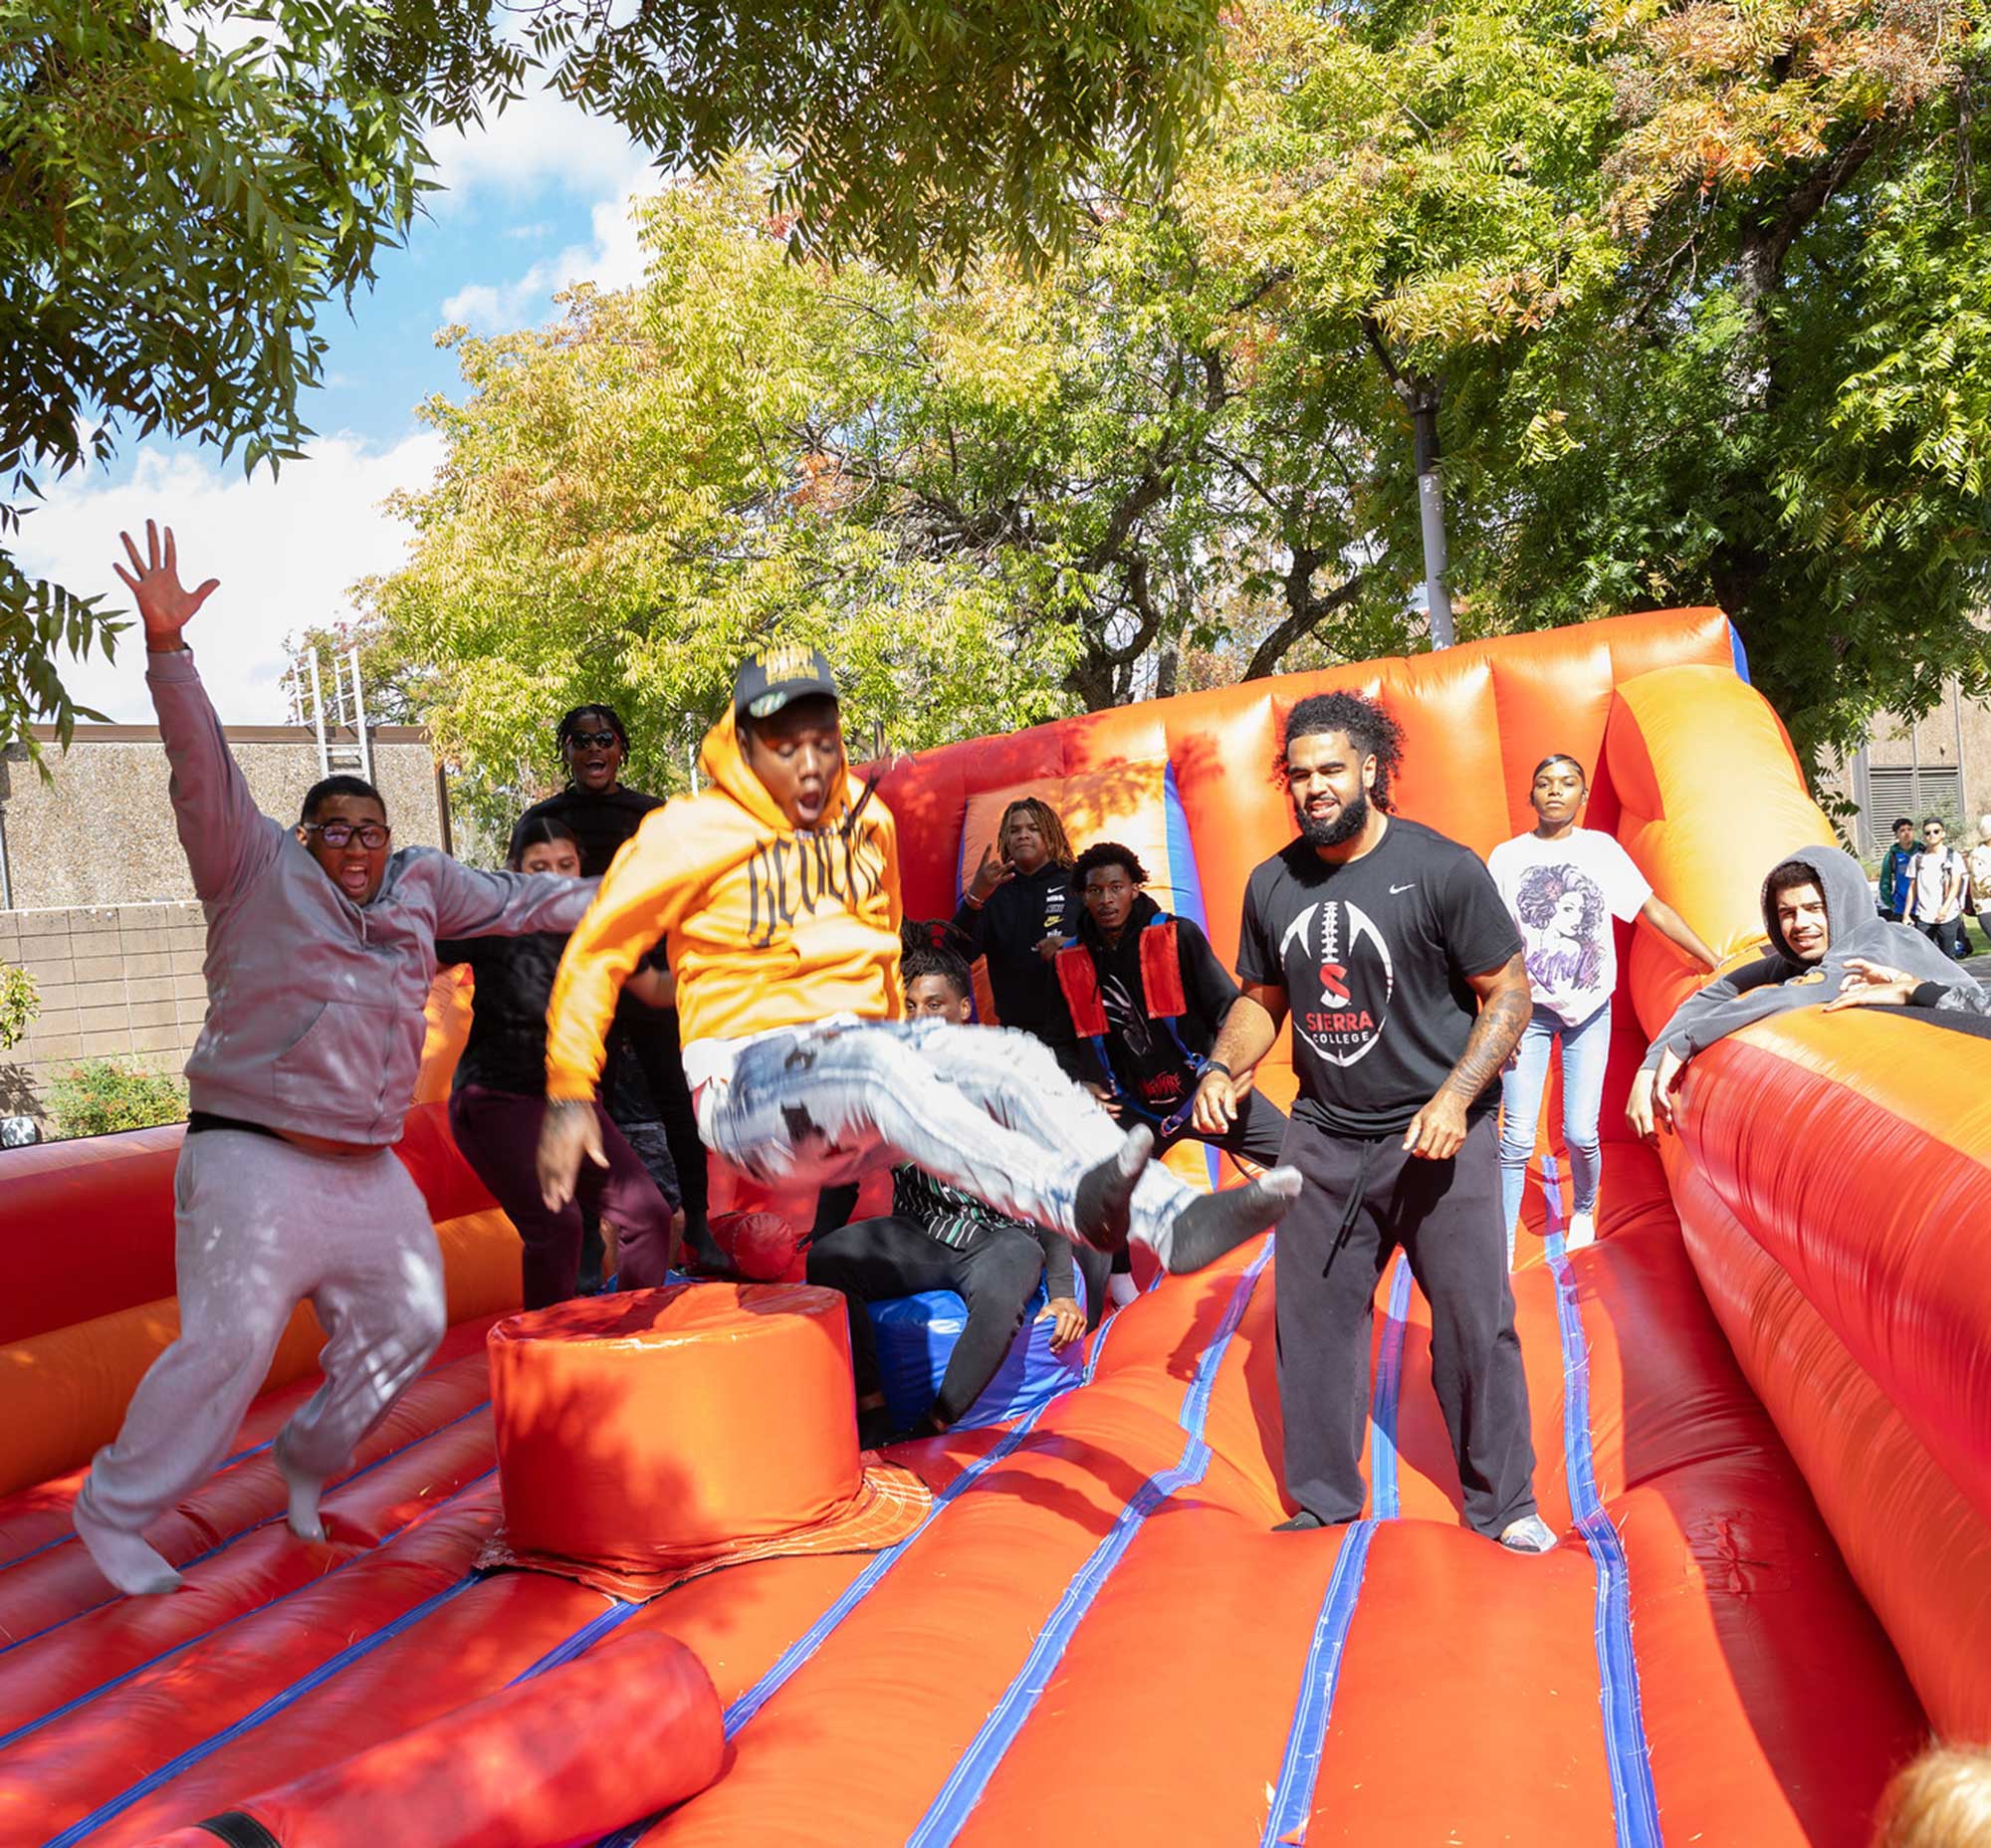 Students attending Residence Hall orientation get to know one another playing games on giant blow-up toys.